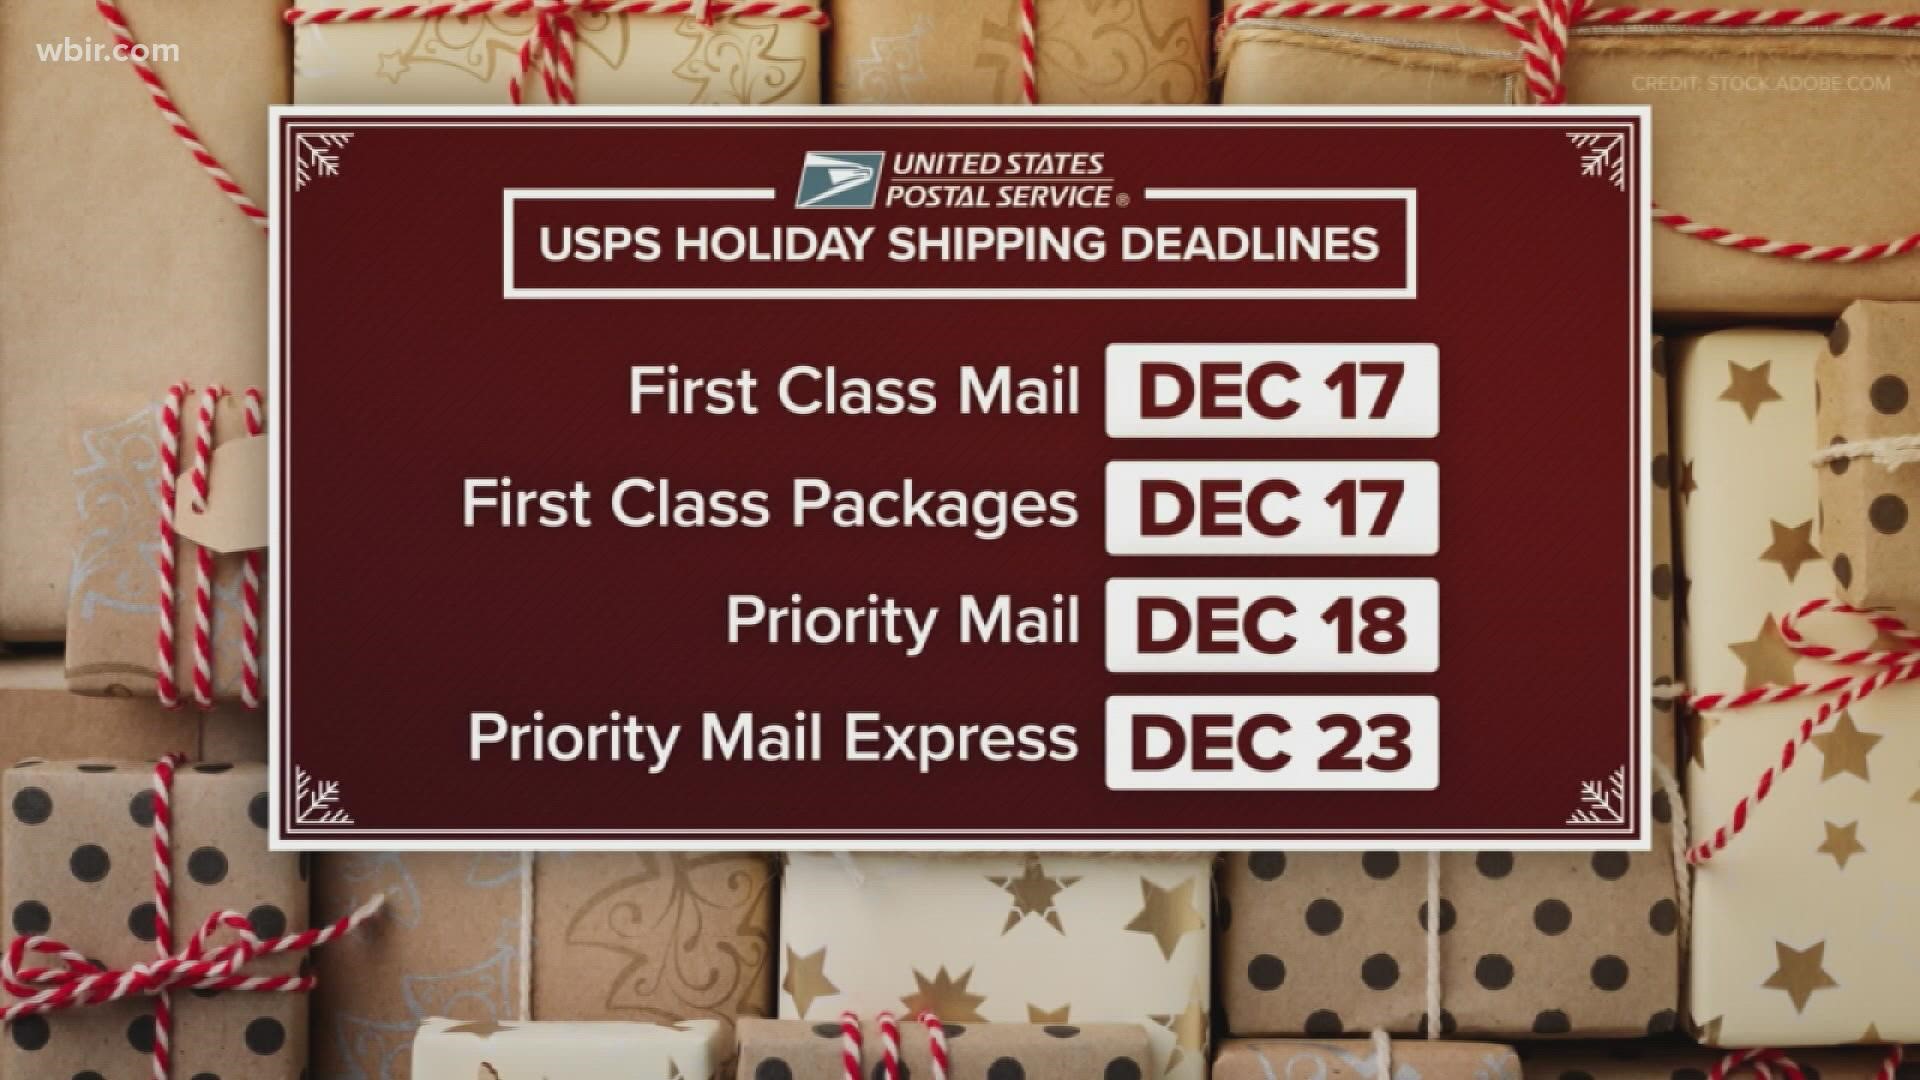 As holiday shopping kicks into full gear, don't forget there are shipping deadlines coming up!